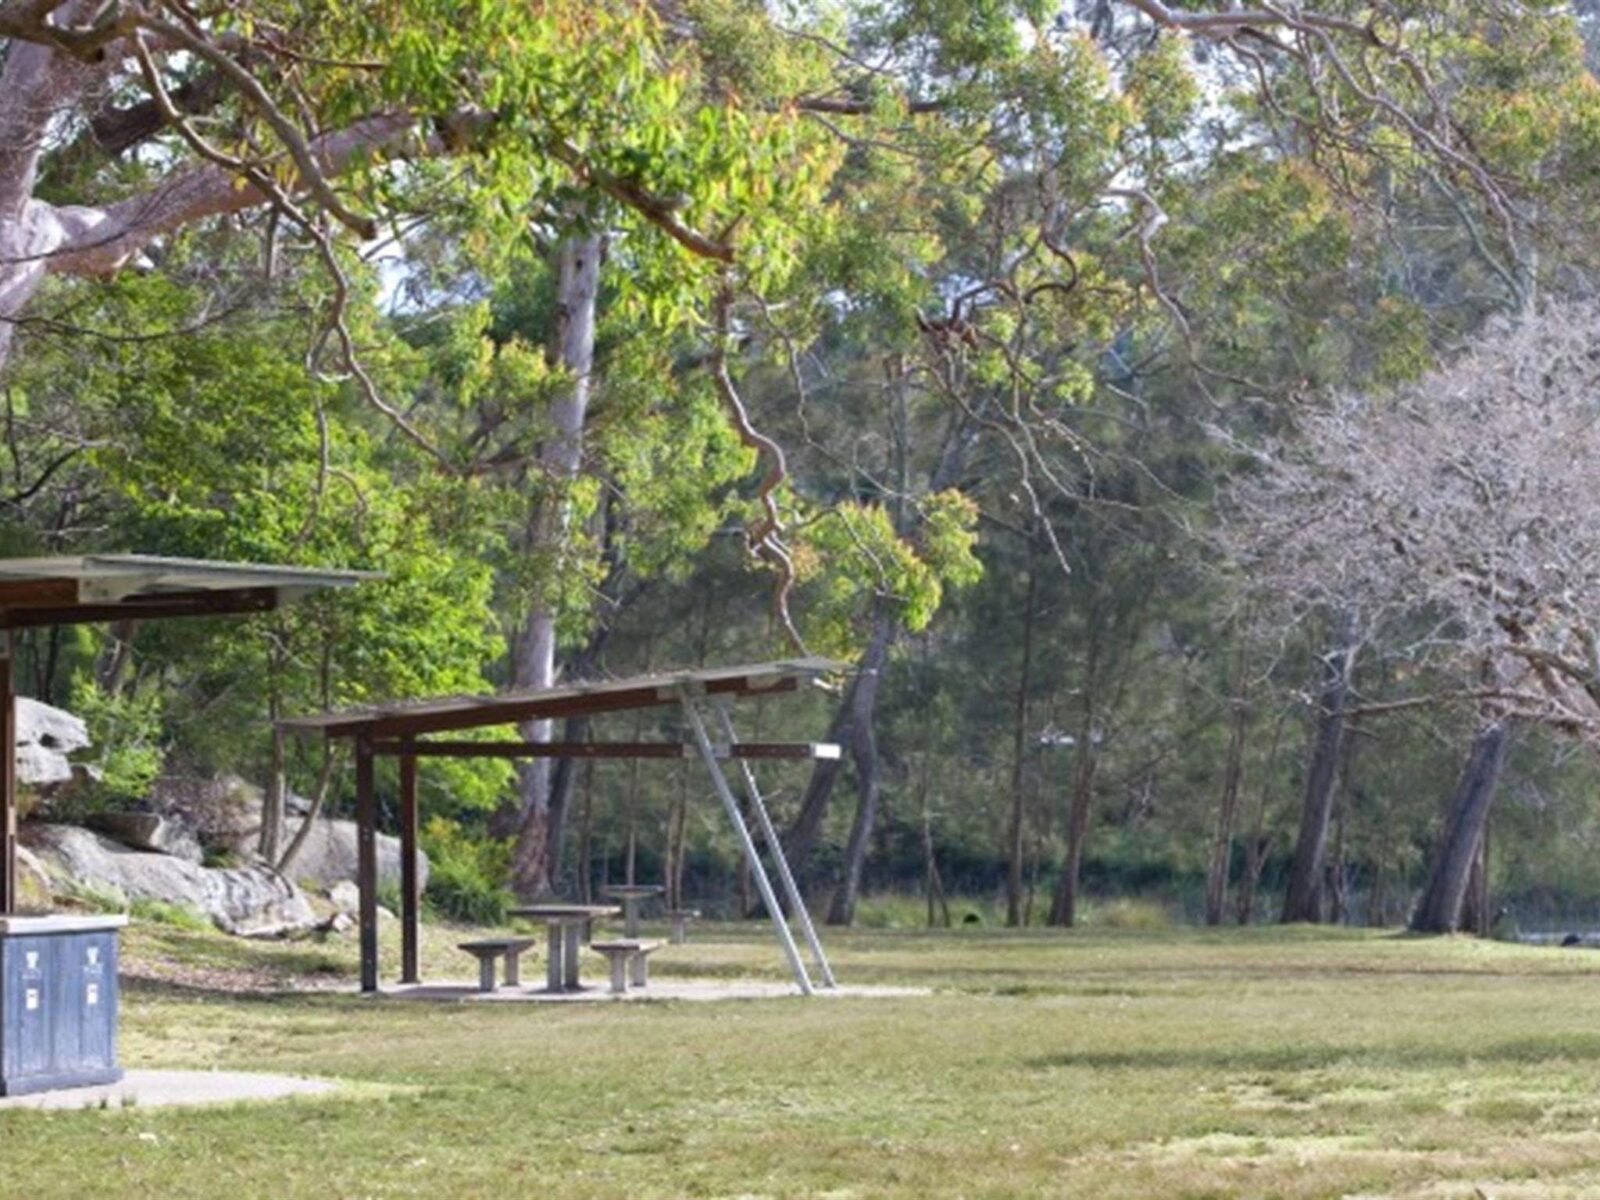 Picnic shelter and barbecue at Currawong Flat picnic area in Royal National Park. Photo: Nick Cubbin